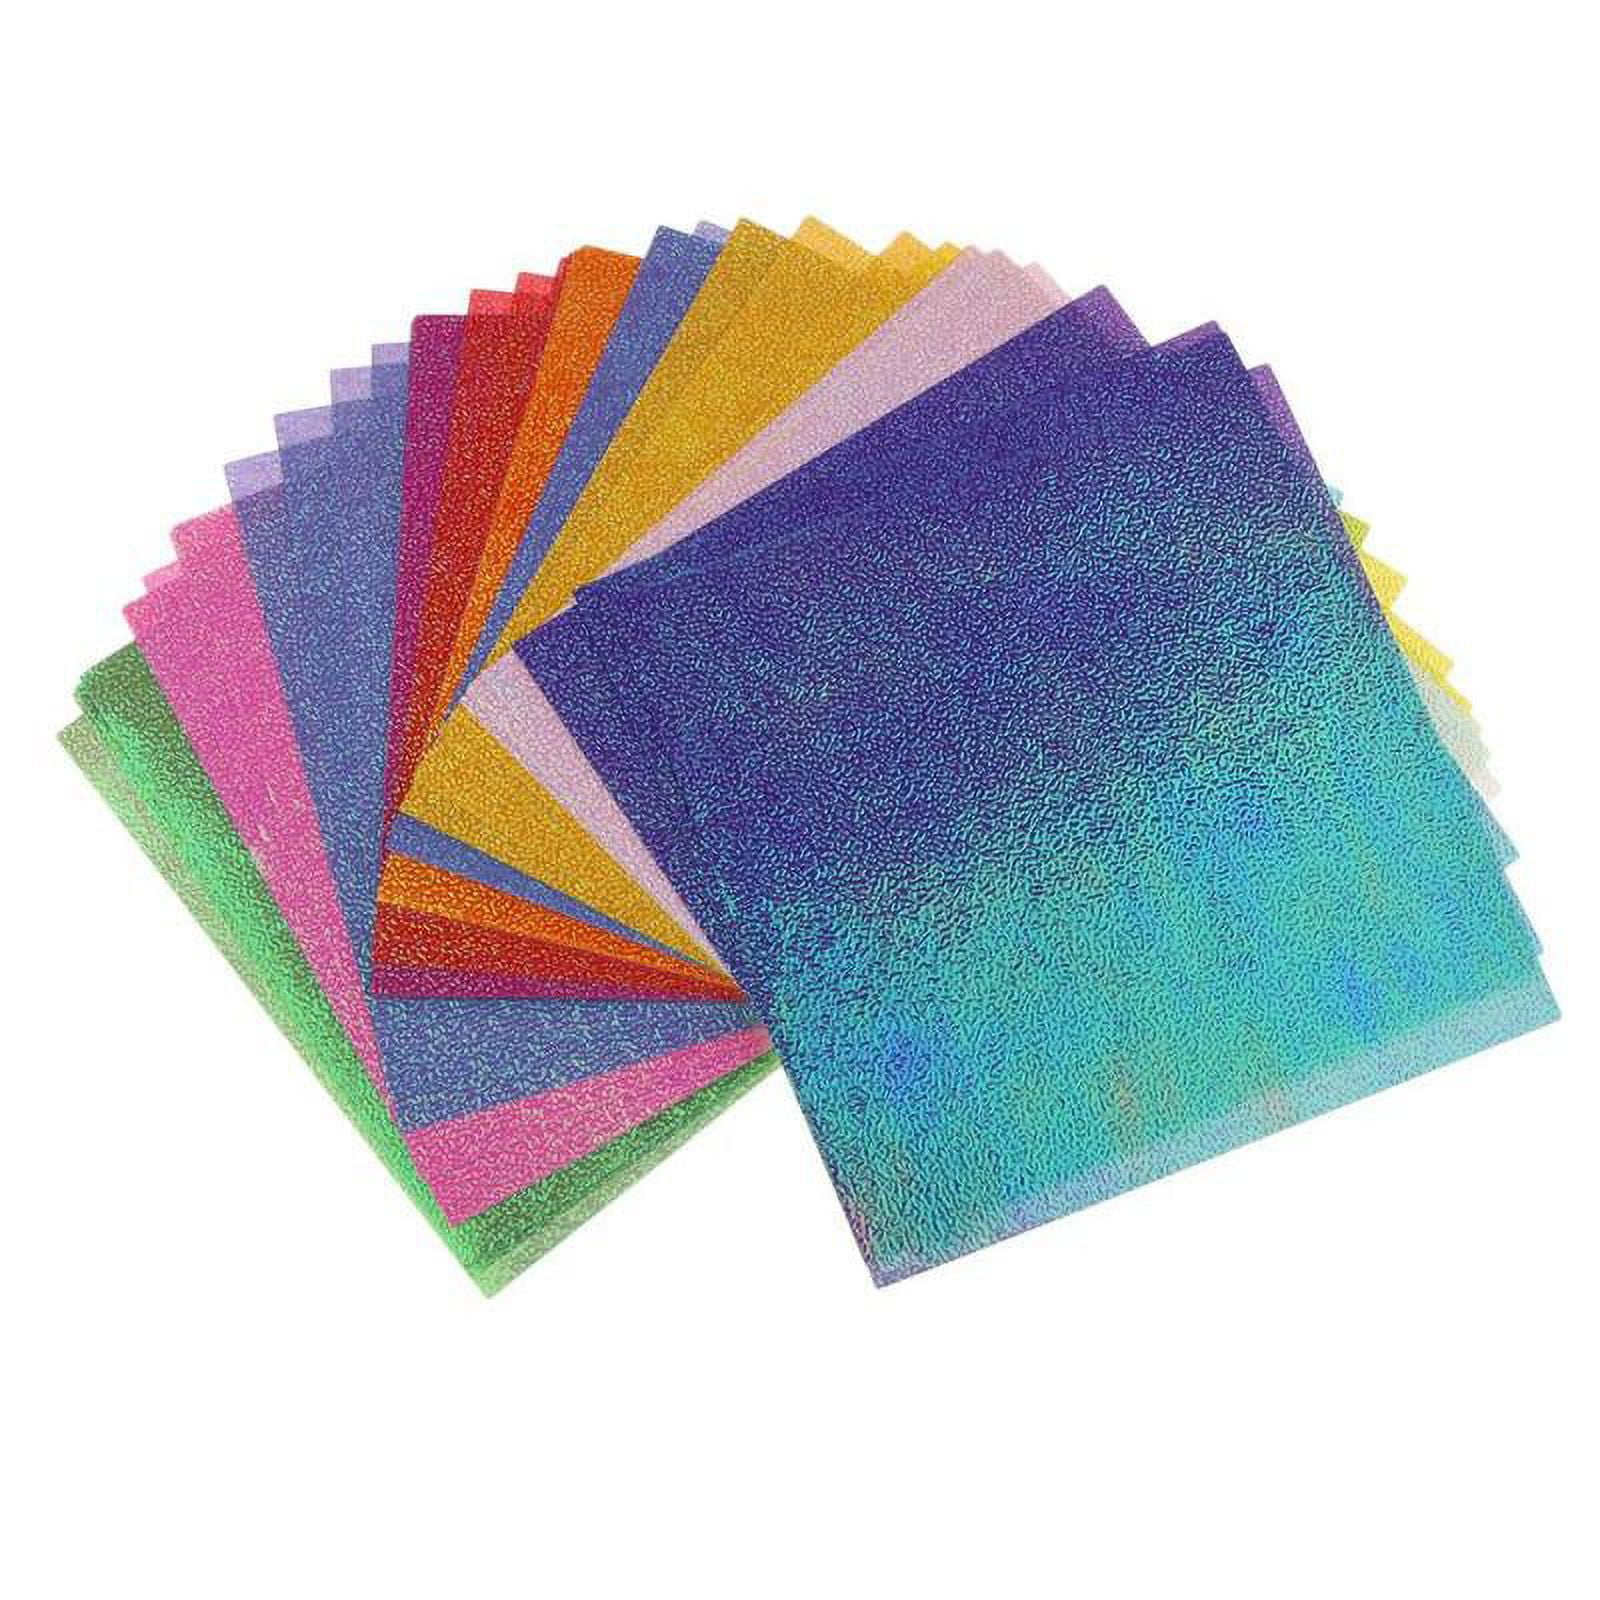 100 X Pearlescent Shimmer Craft Paper Metallic Pearl Sheets 